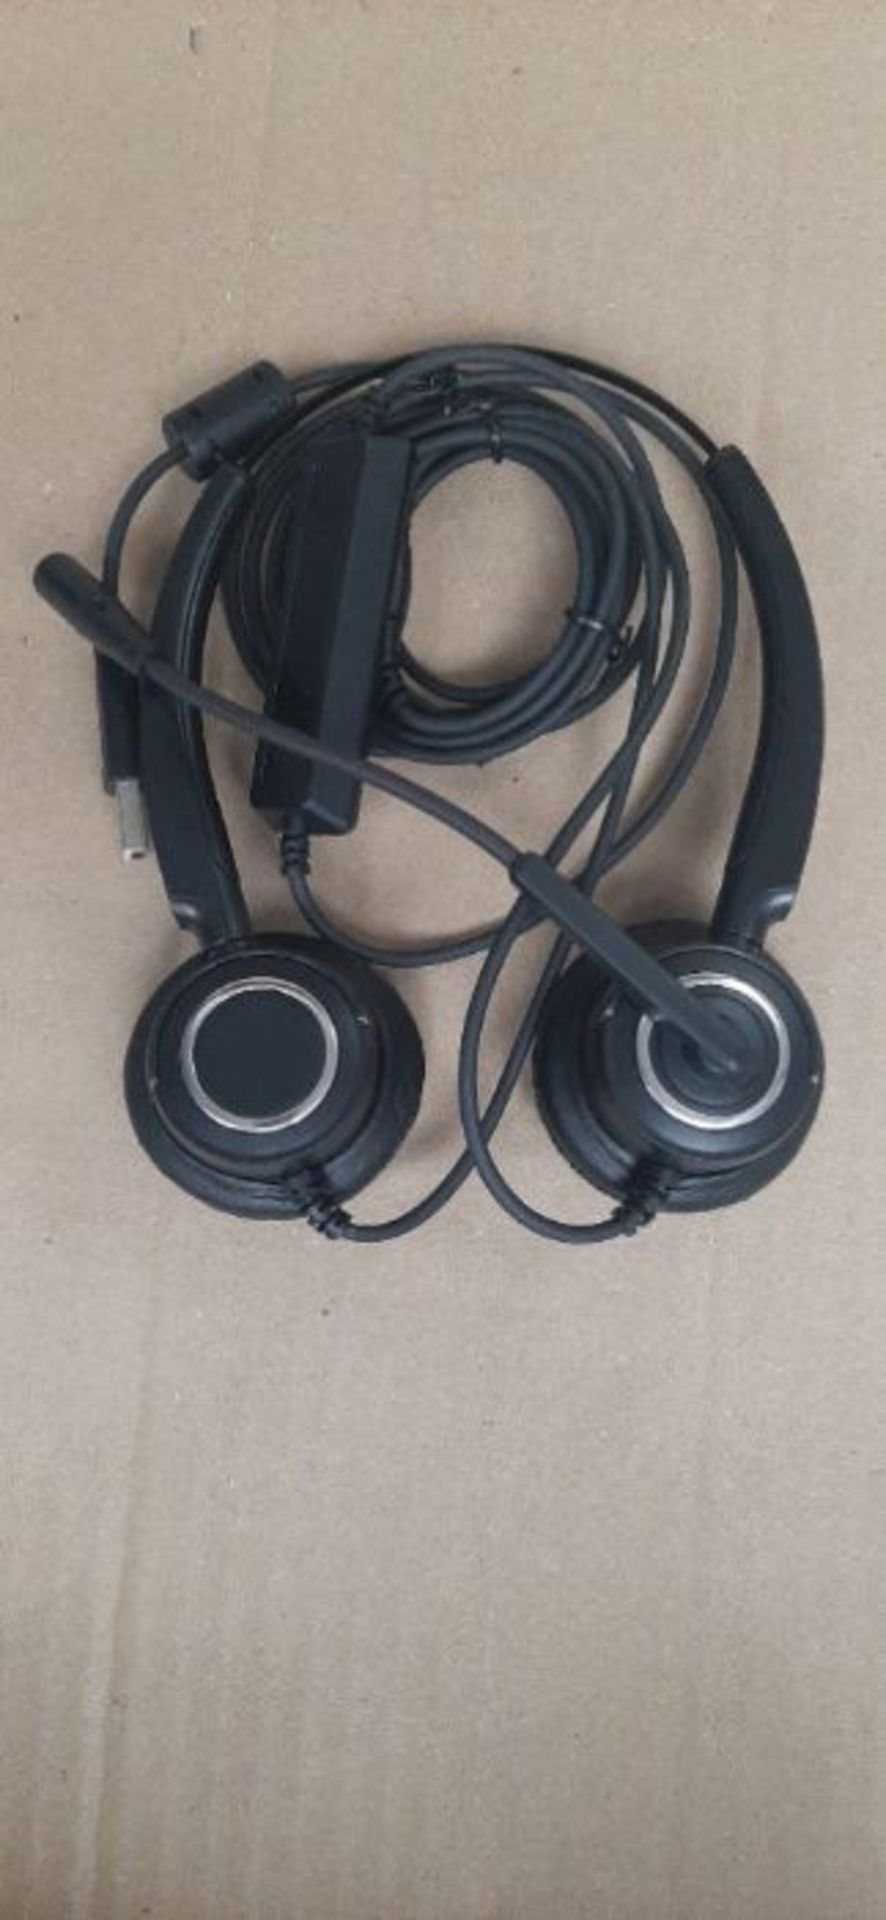 USB Headset with Microphone, HUET PC Headset with Microphone Noise Cancelling & Audio - Image 2 of 2